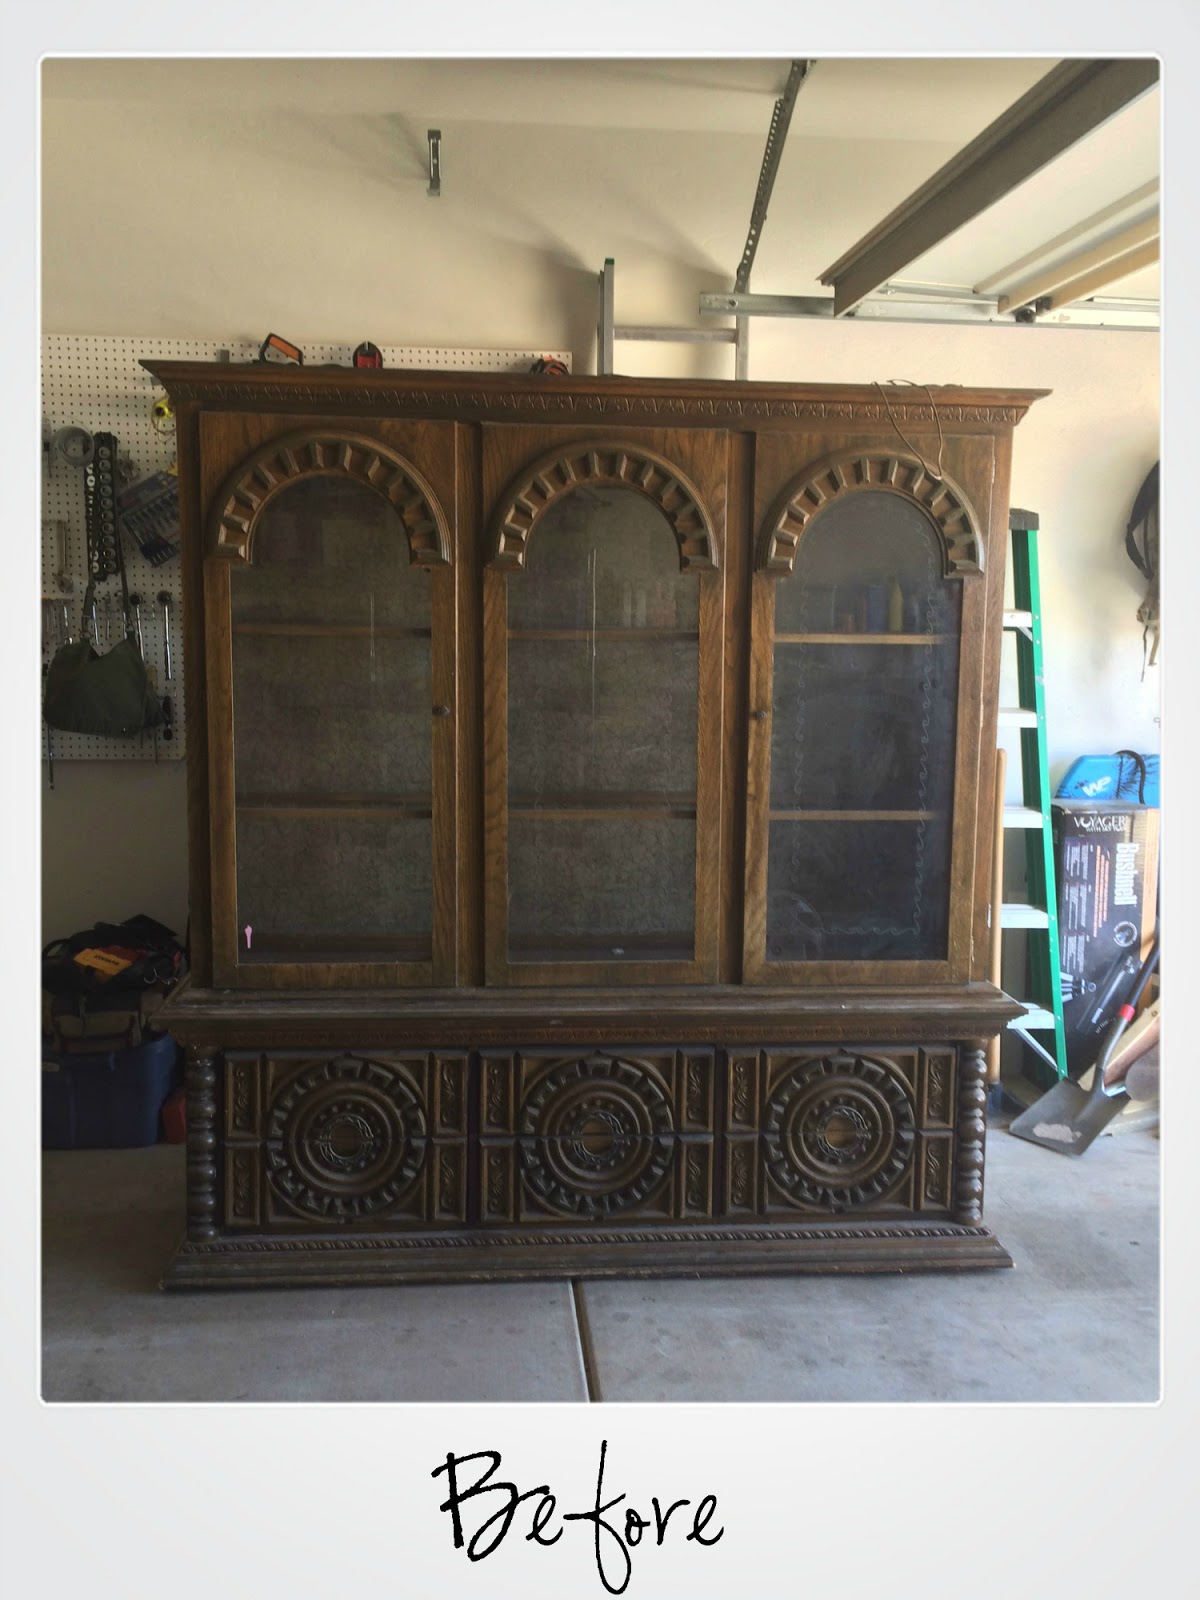 hutch makeover, painted hutch, diy, before and after, adding legs to furniture, refinished hutch